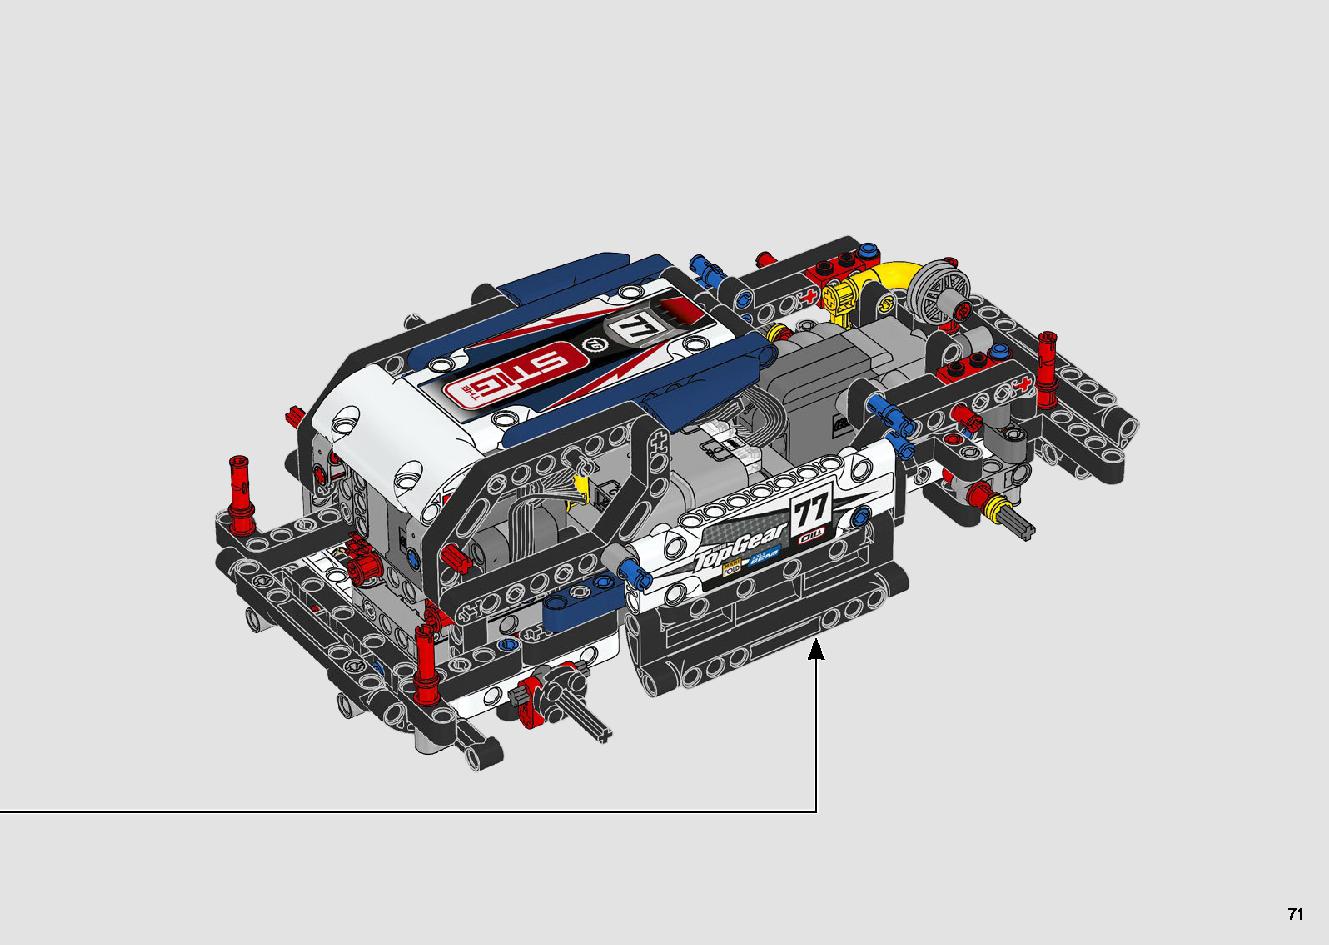 App-Controlled Top Gear Rally Car 42109 LEGO information LEGO instructions 71 page